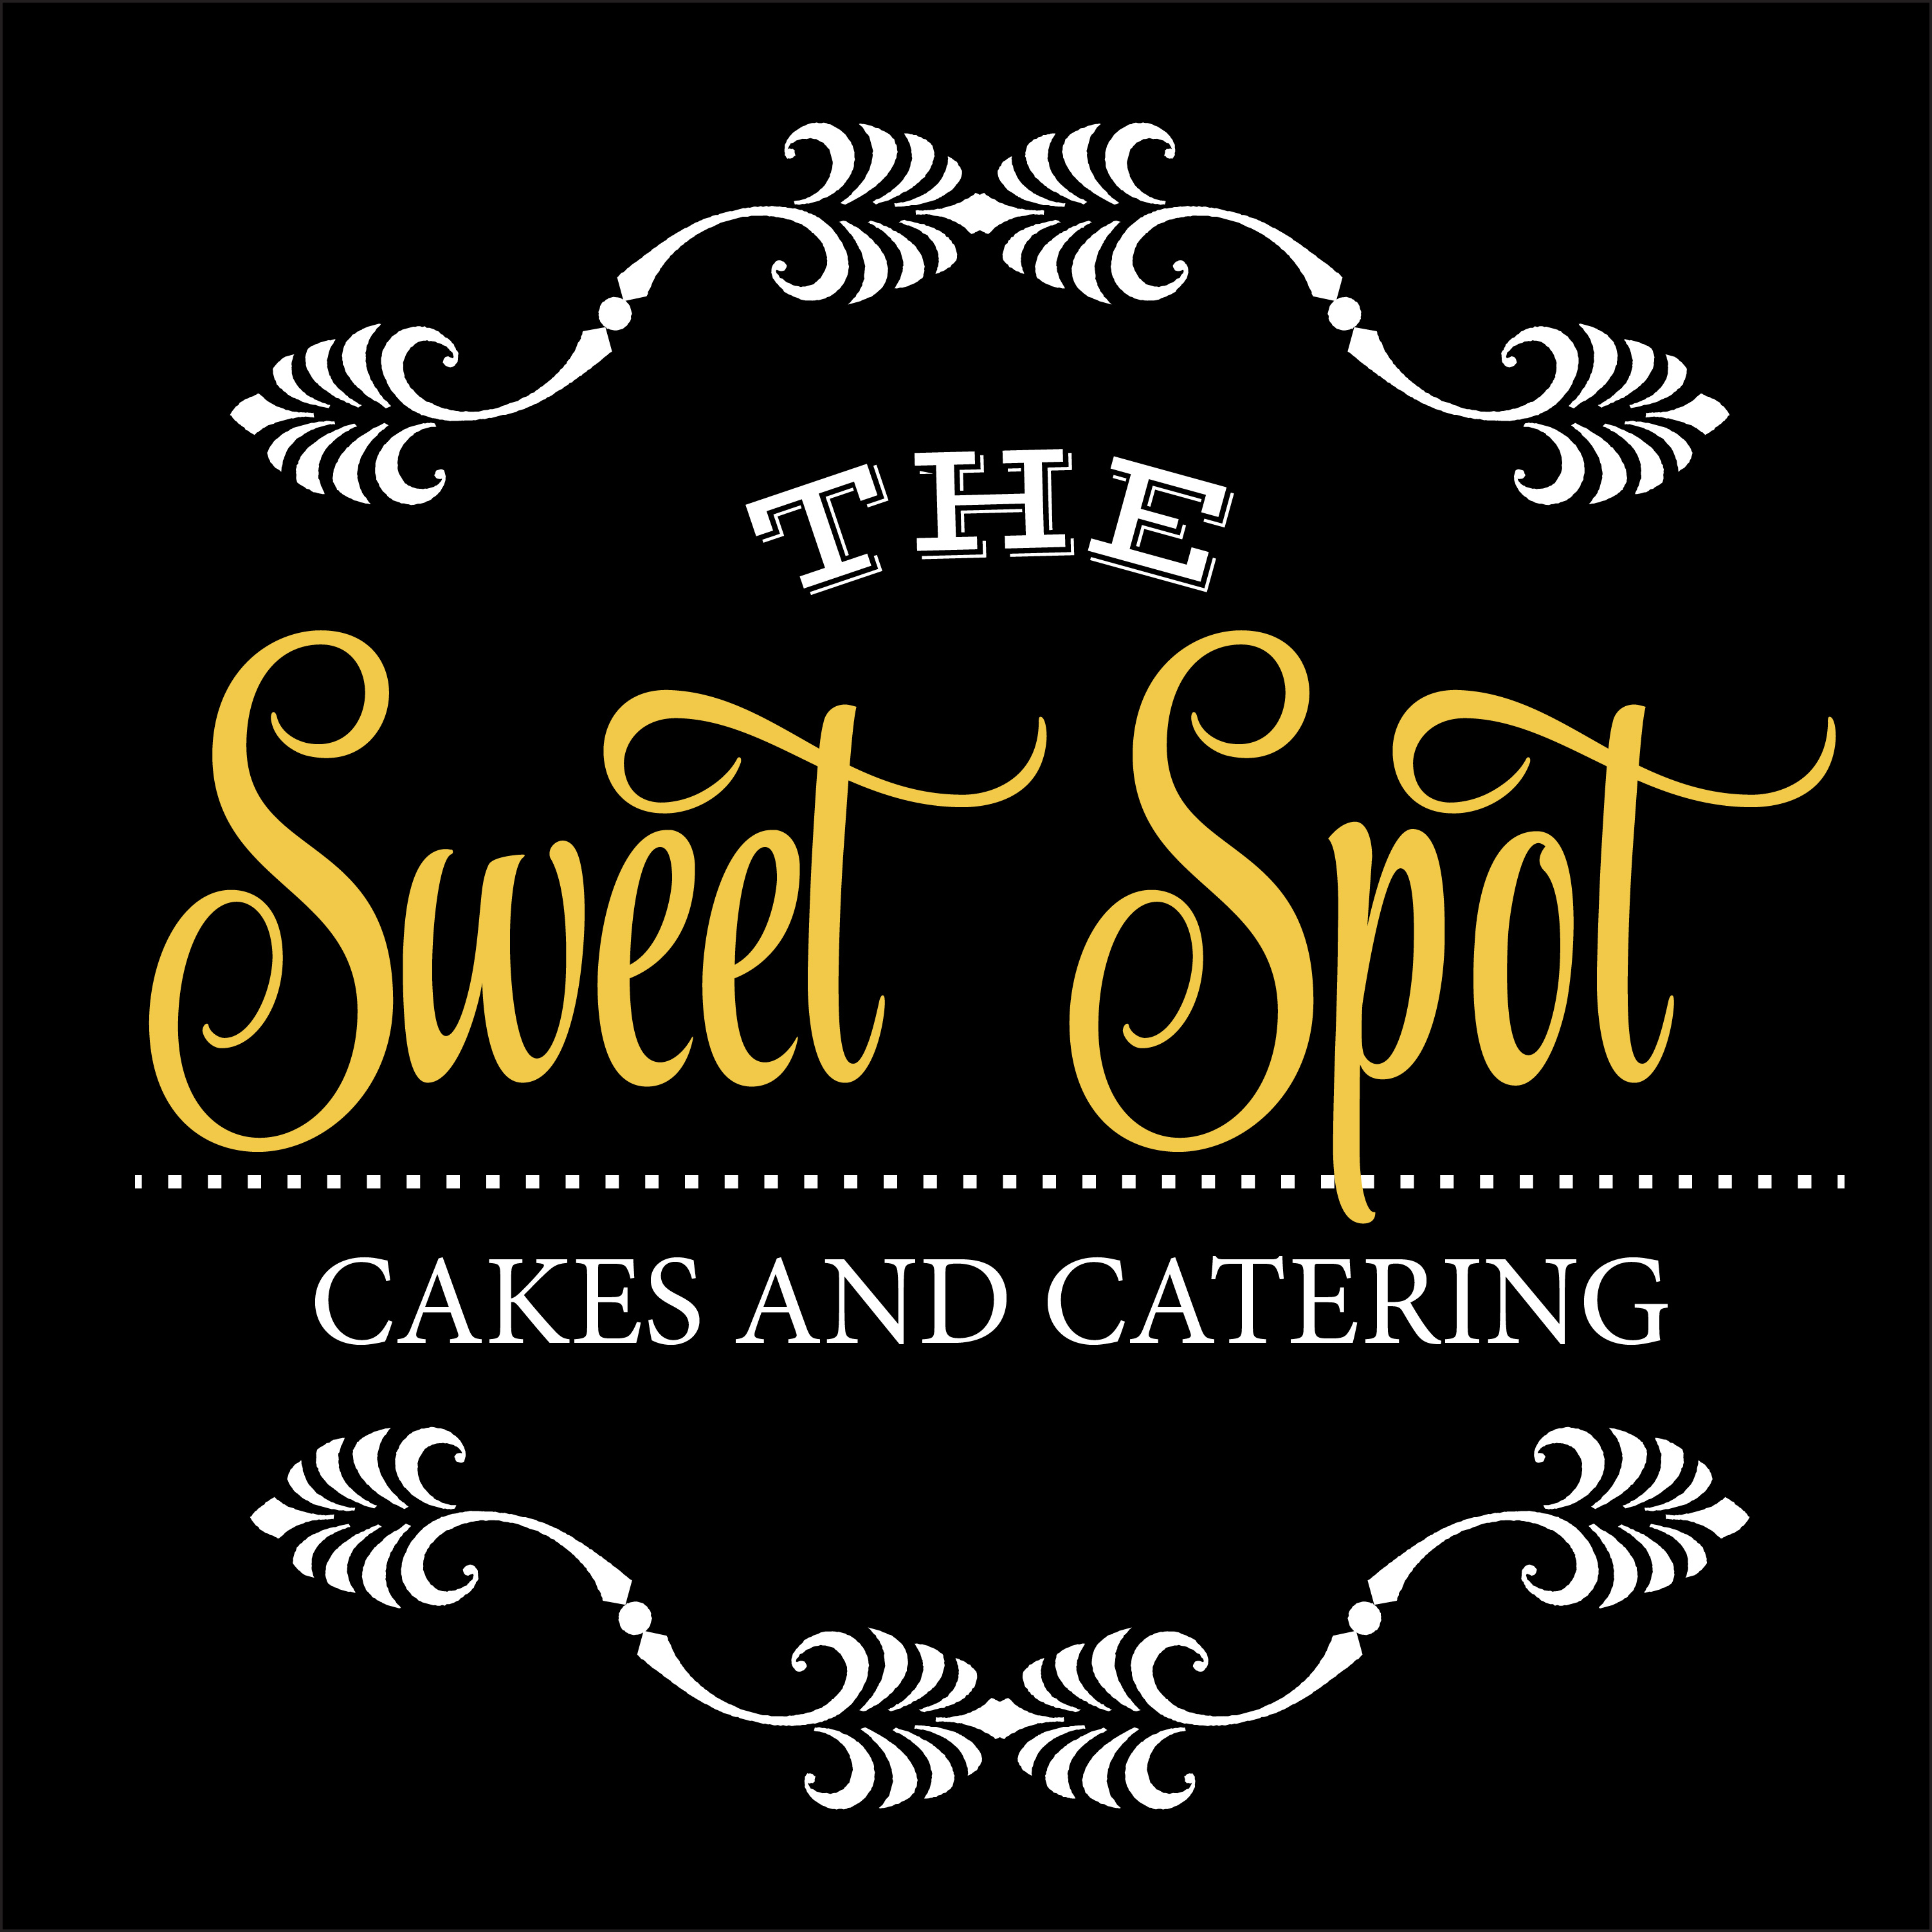 The Sweet Spot Cakes & Catering